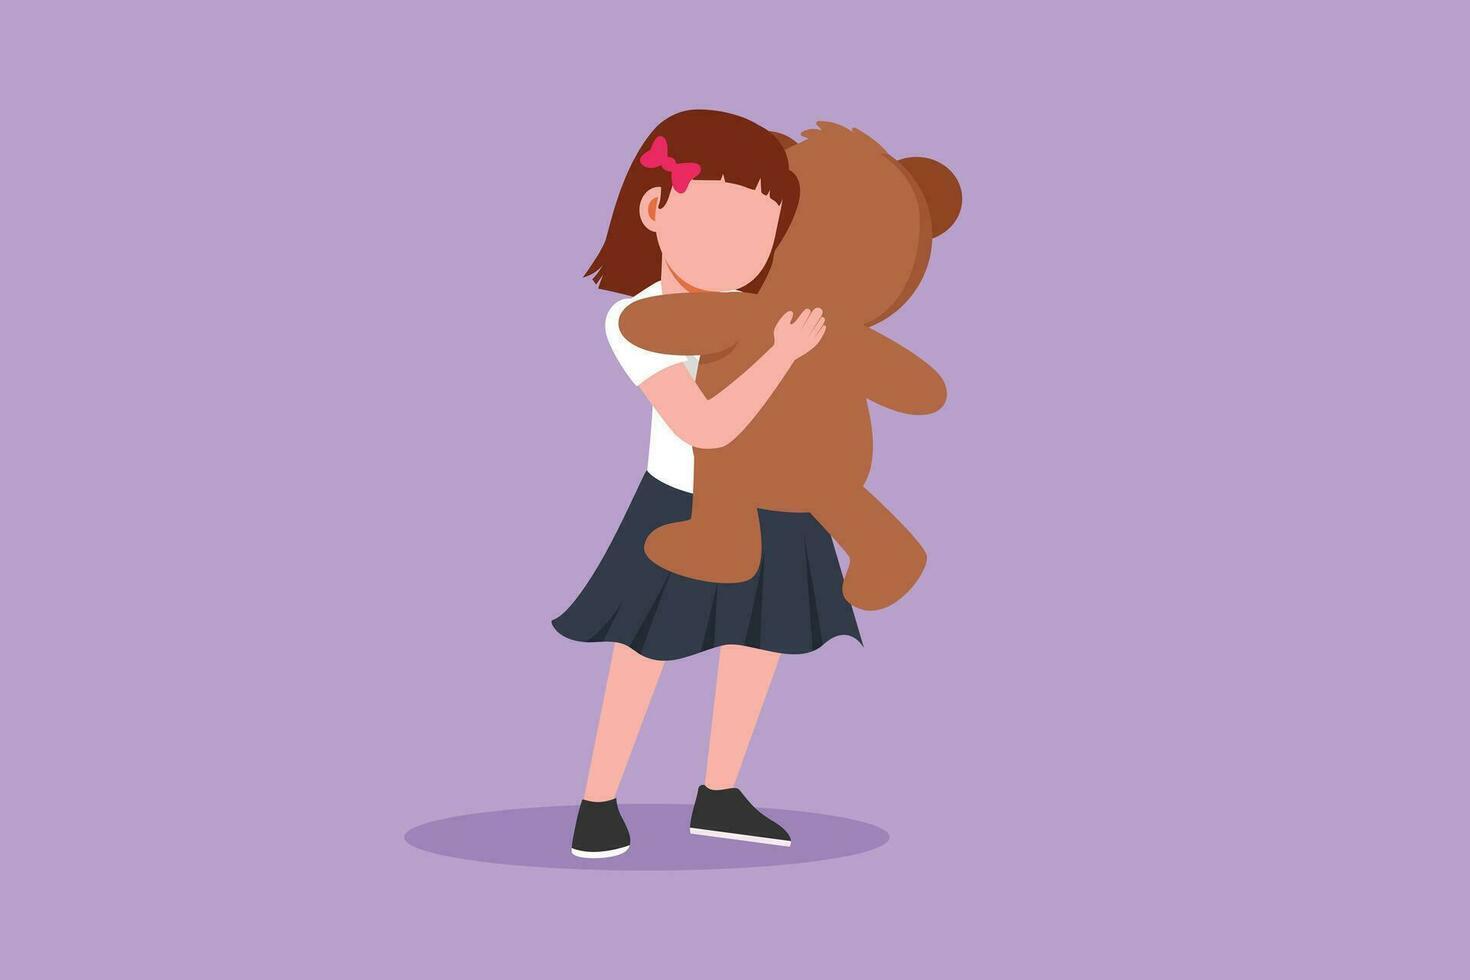 Character flat drawing cute little girl standing and hugging teddy bear. Portrait of expressive kid hugging her plush bear friend. Little girl playing with her doll. Cartoon design vector illustration